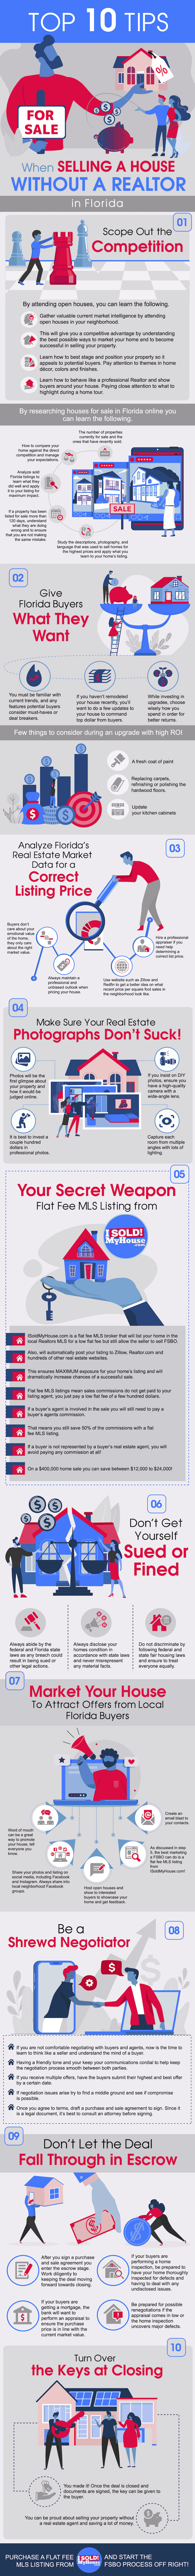 infographic of the 10 steps to sell a house in florida without an agent